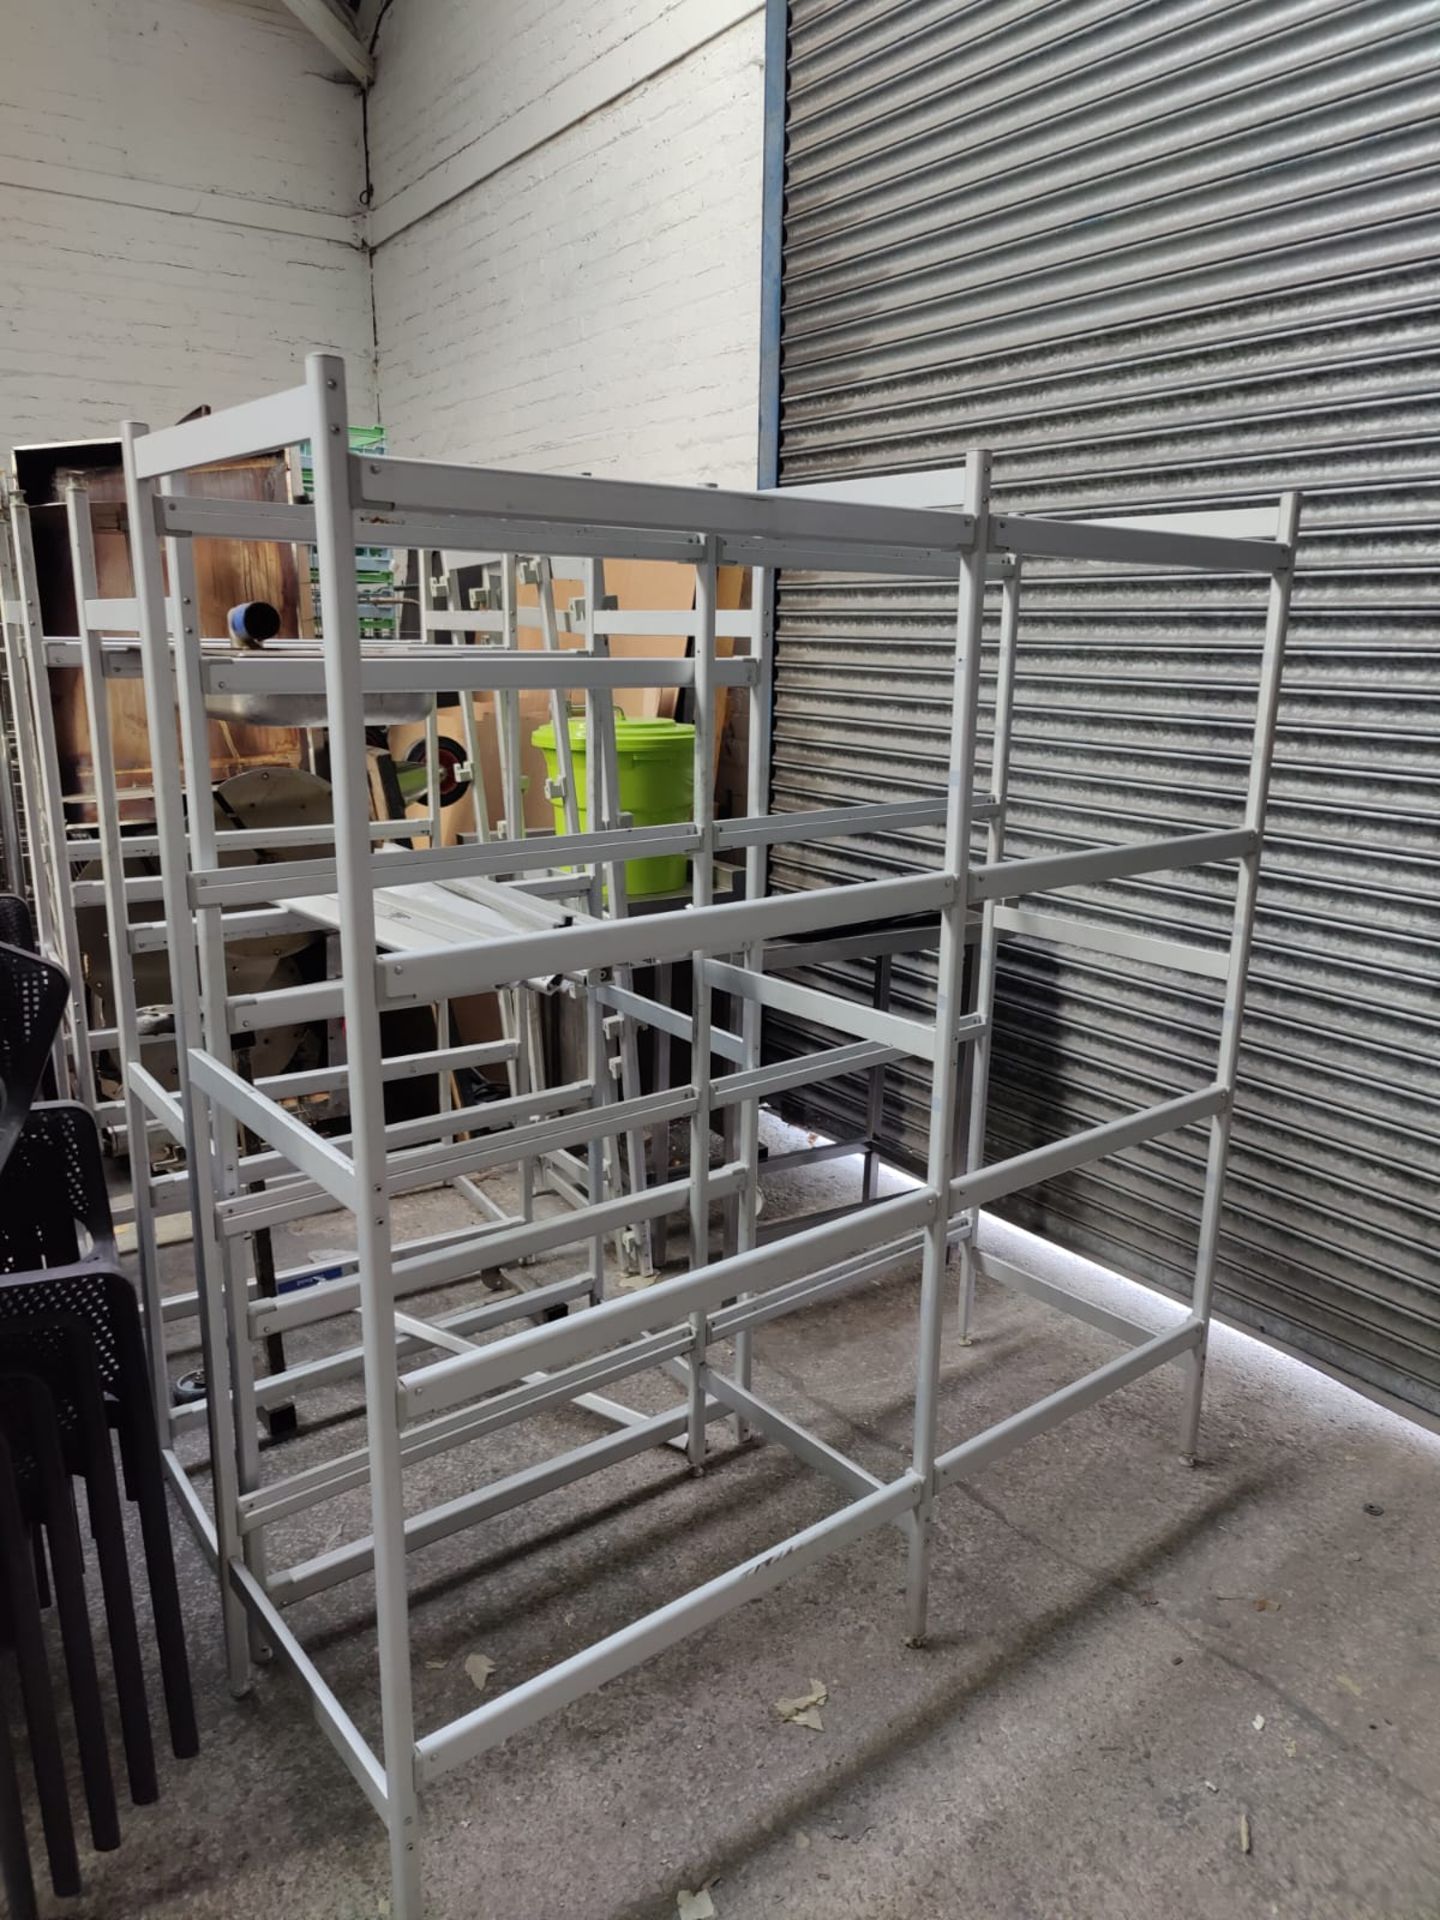 1 x Collection of Cold Room Shelving - Aluminium Shelving With Hygienic Plastic Perforated Shelves - - Image 2 of 5